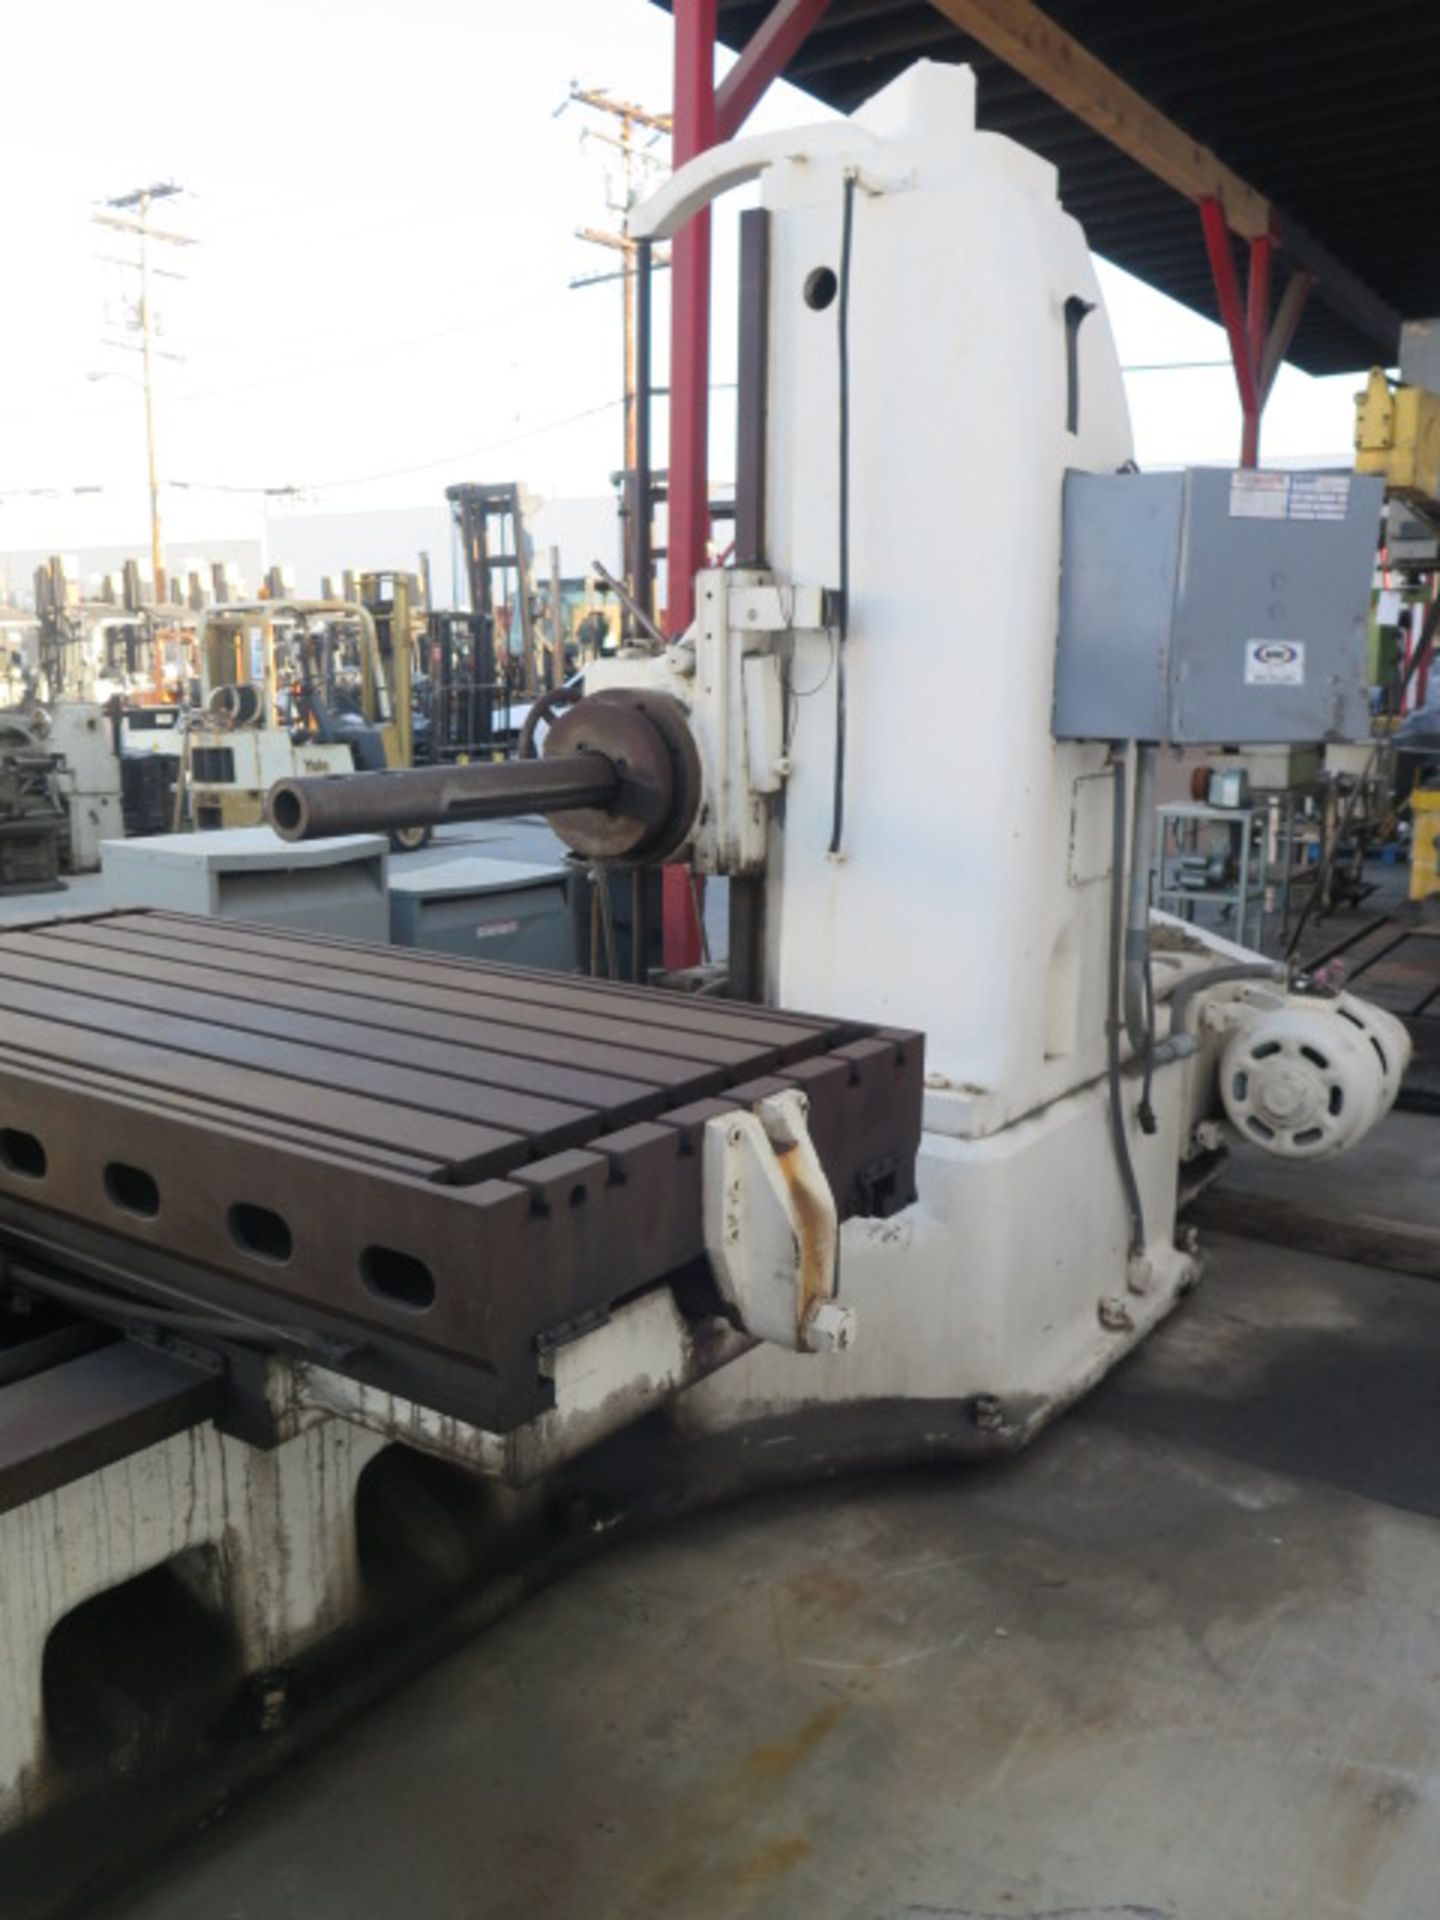 Portage Machine Co. Horizontal Boring Mill w/ 17-611 Geared RPM, Power Feeds, 4''. SOLD AS IS - Image 12 of 12